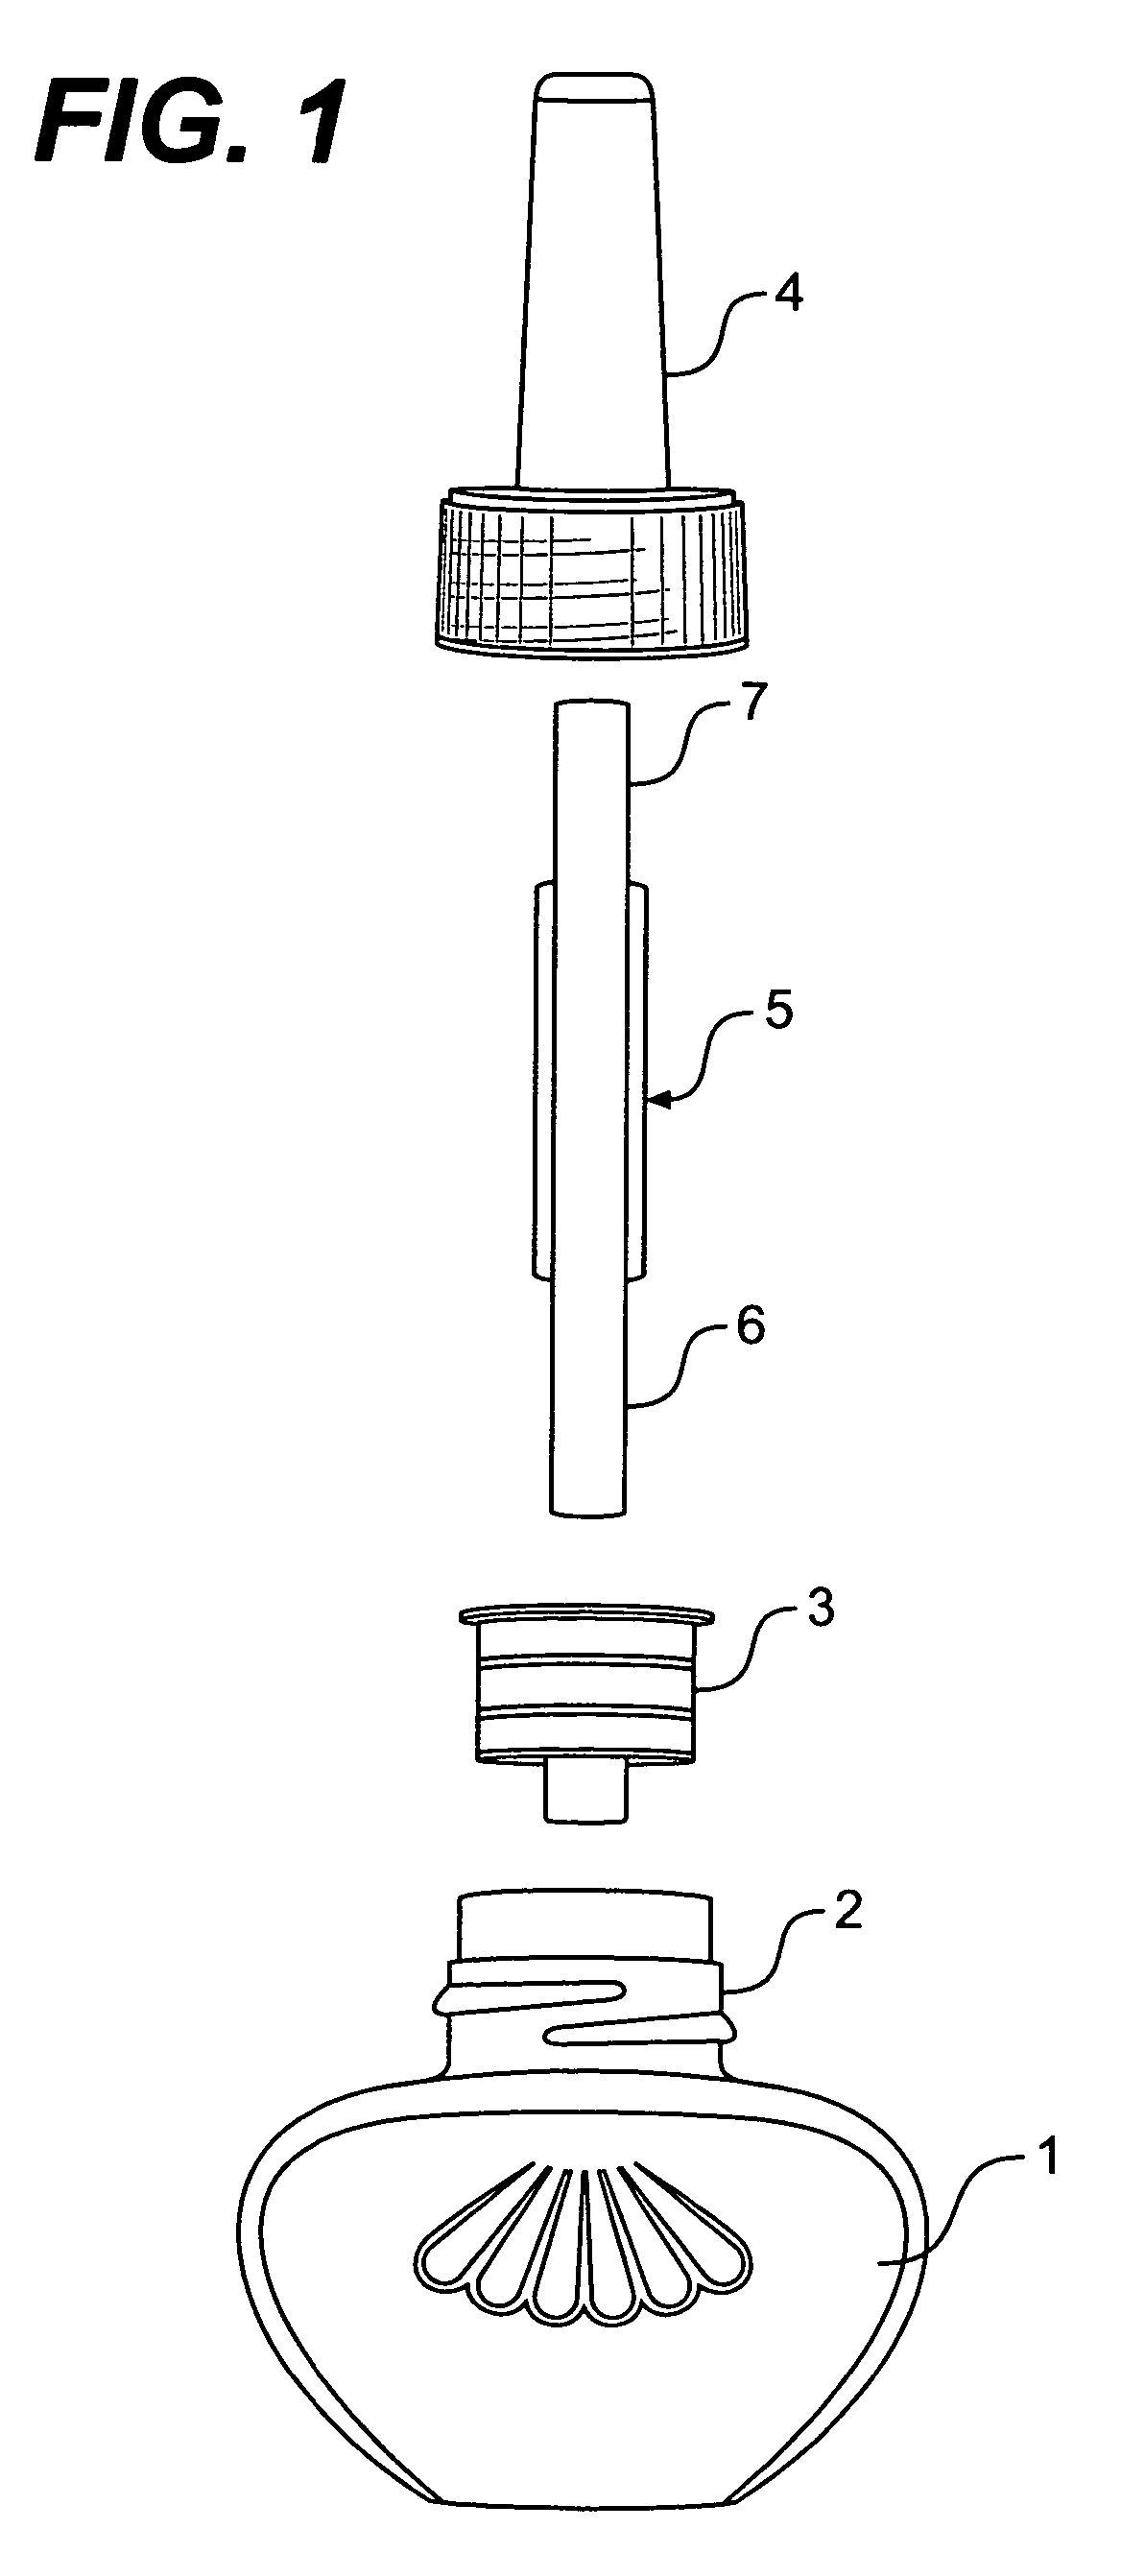 Methods for reducing seepage from wick-based controlled release devices, and wick-based devices having reduced seepage